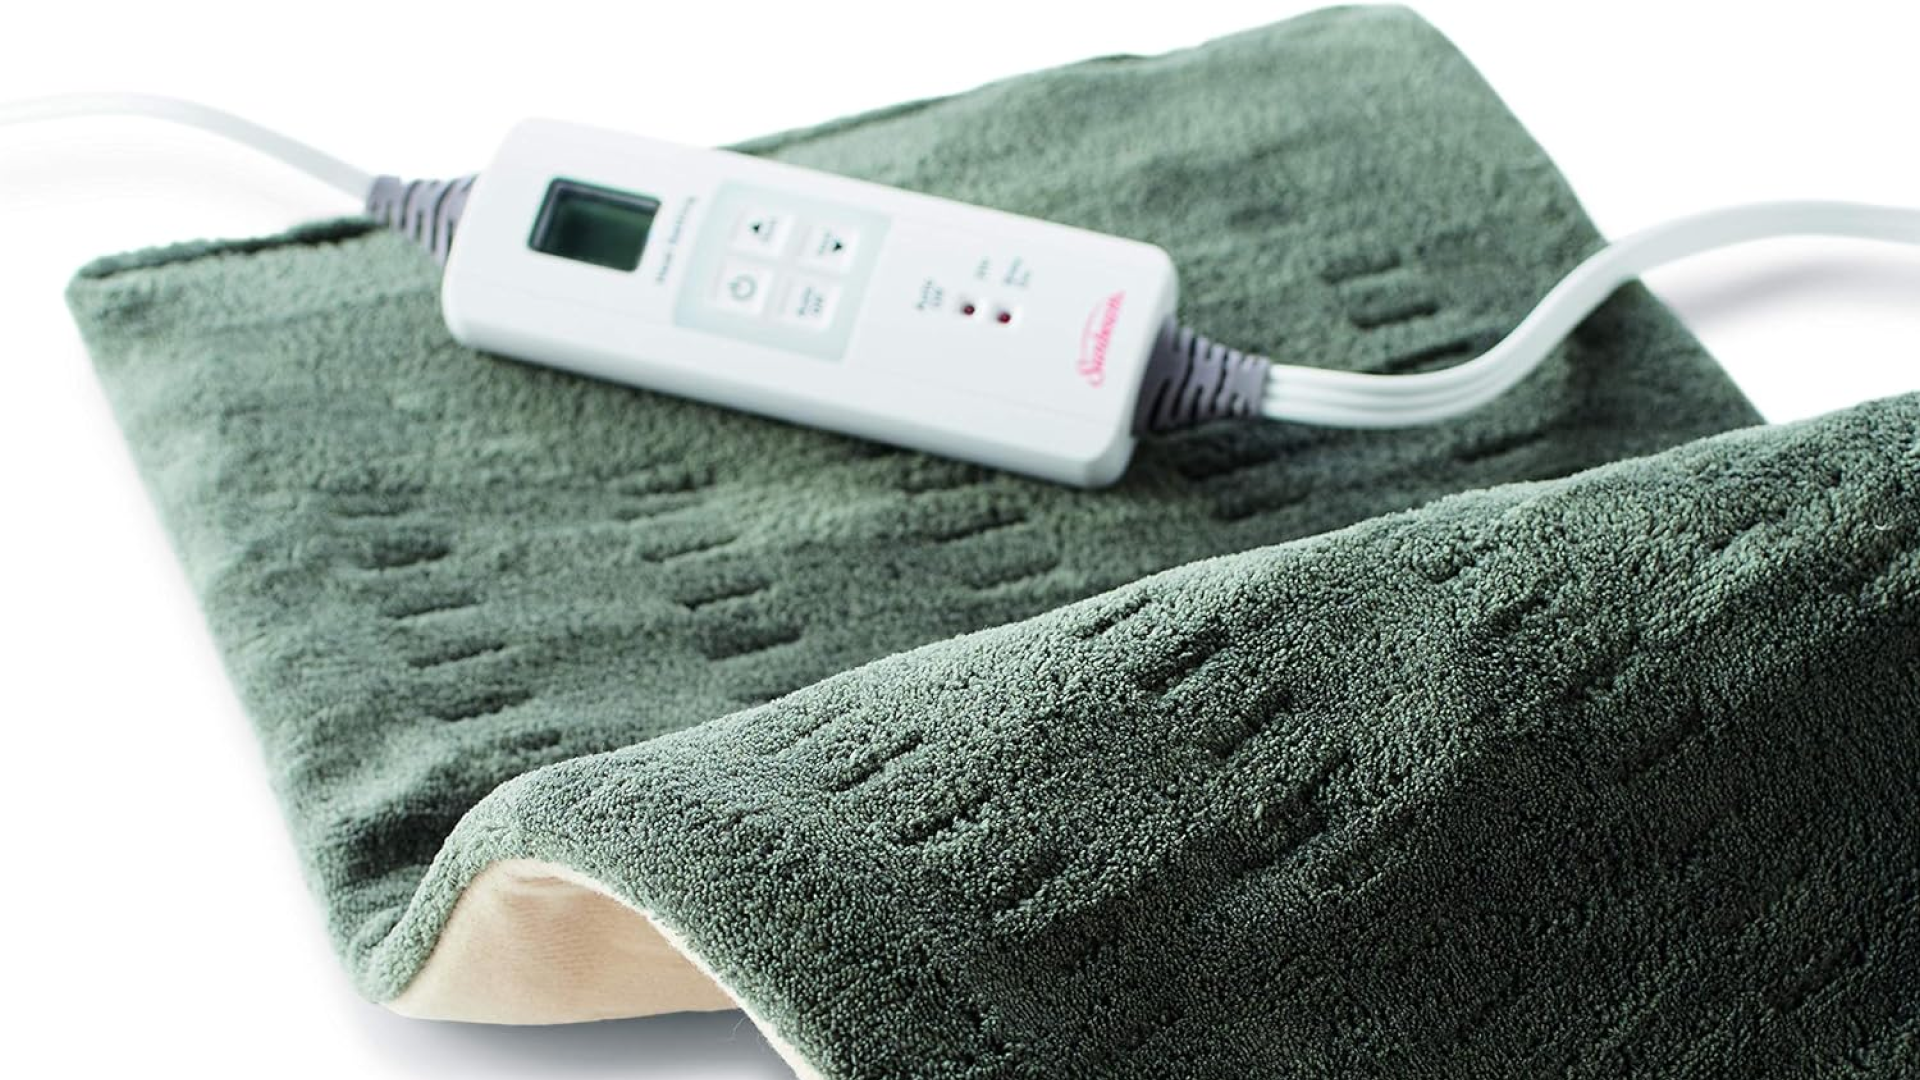 large electric heating pad